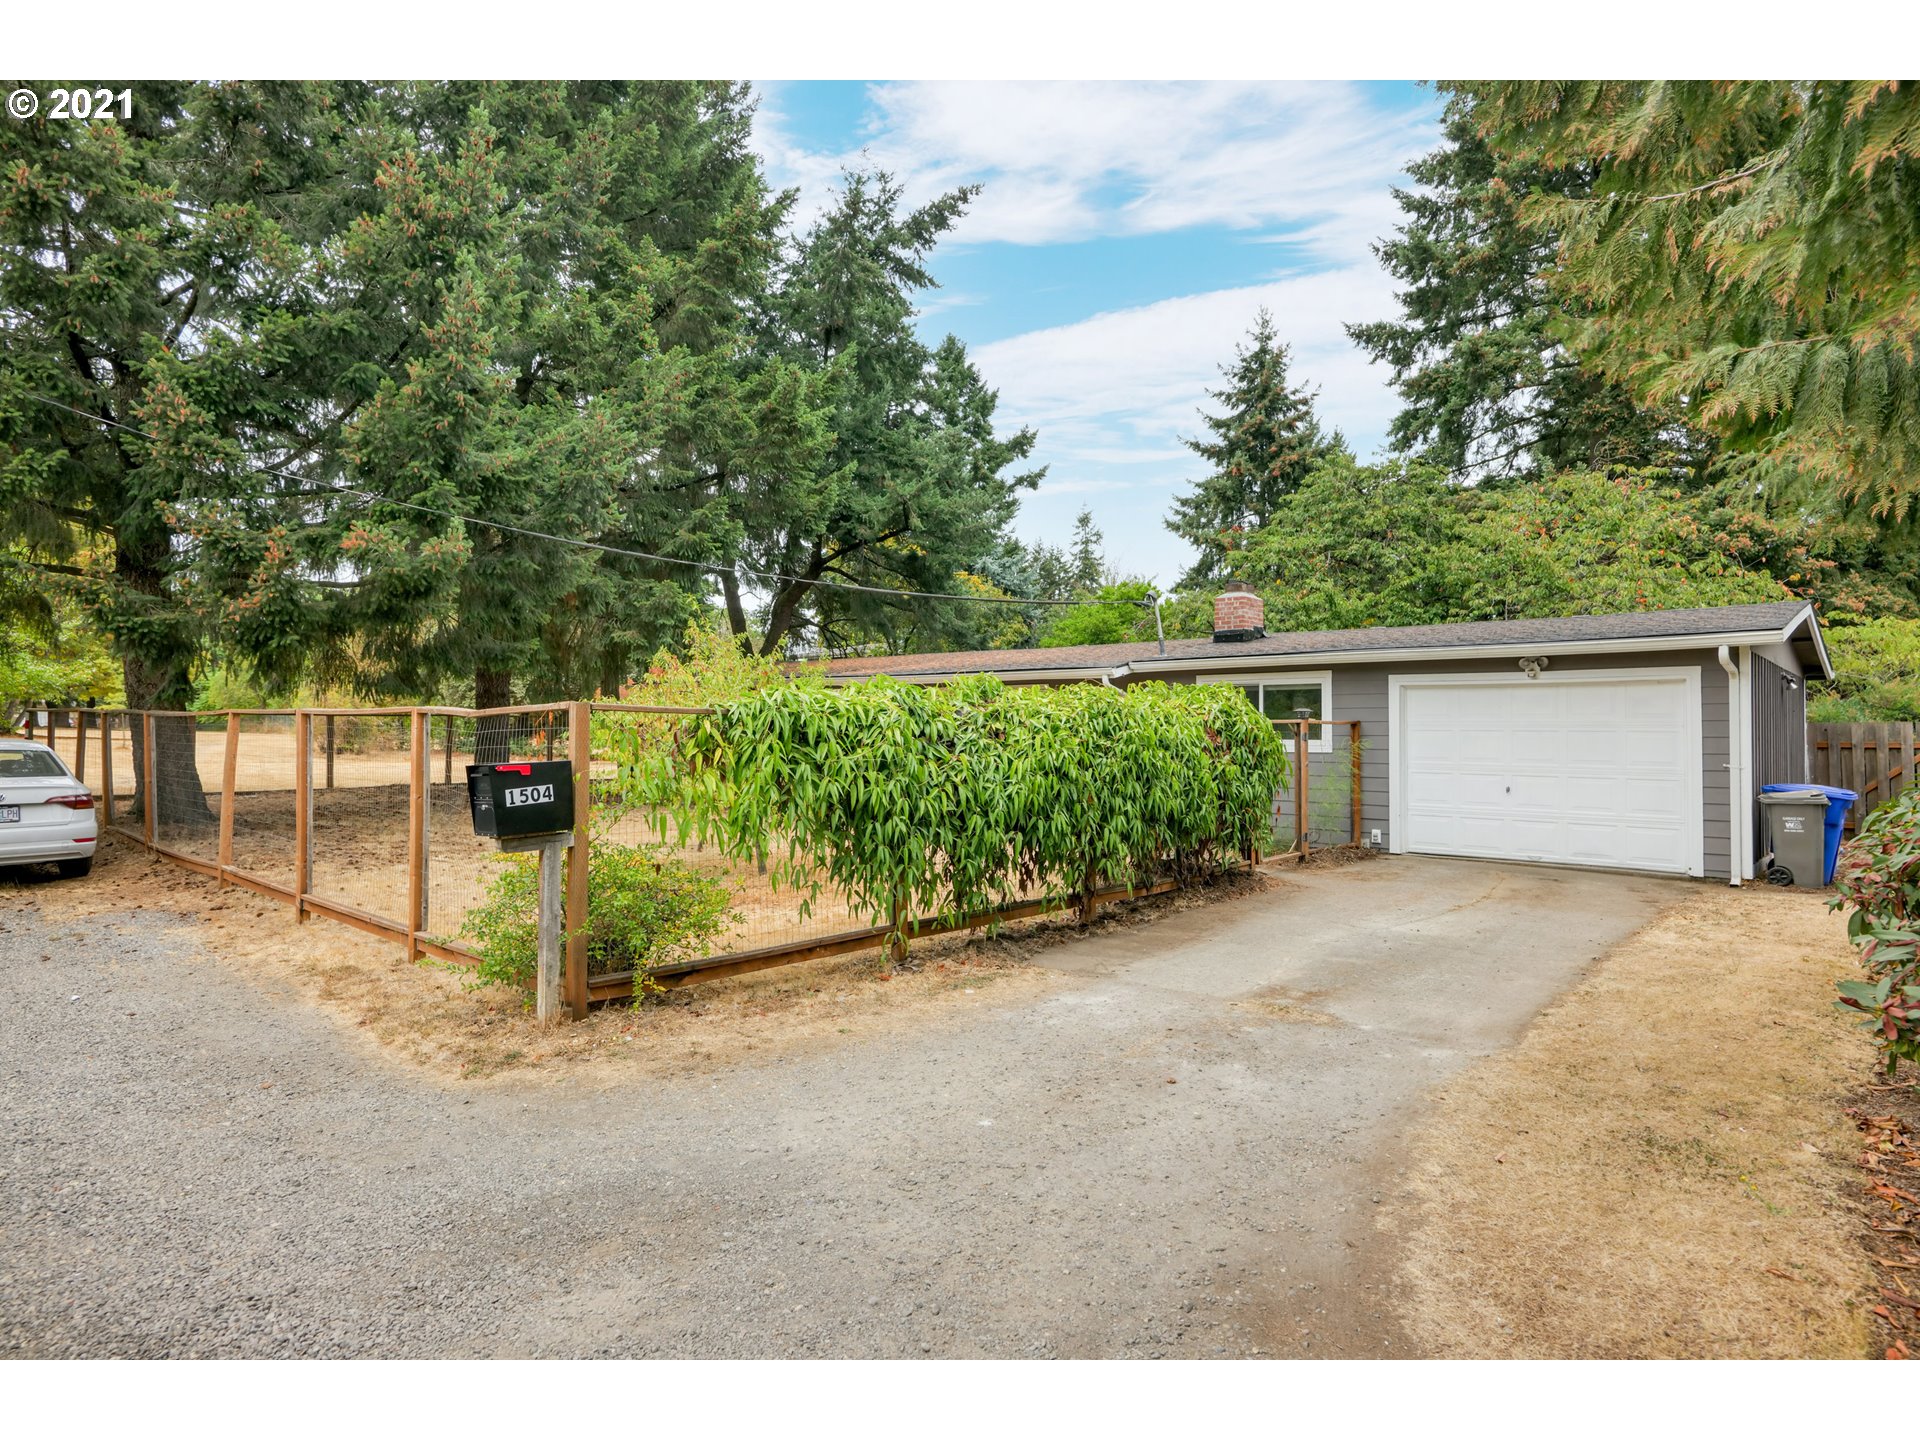 1504 SE 138TH AVE (1 of 24)